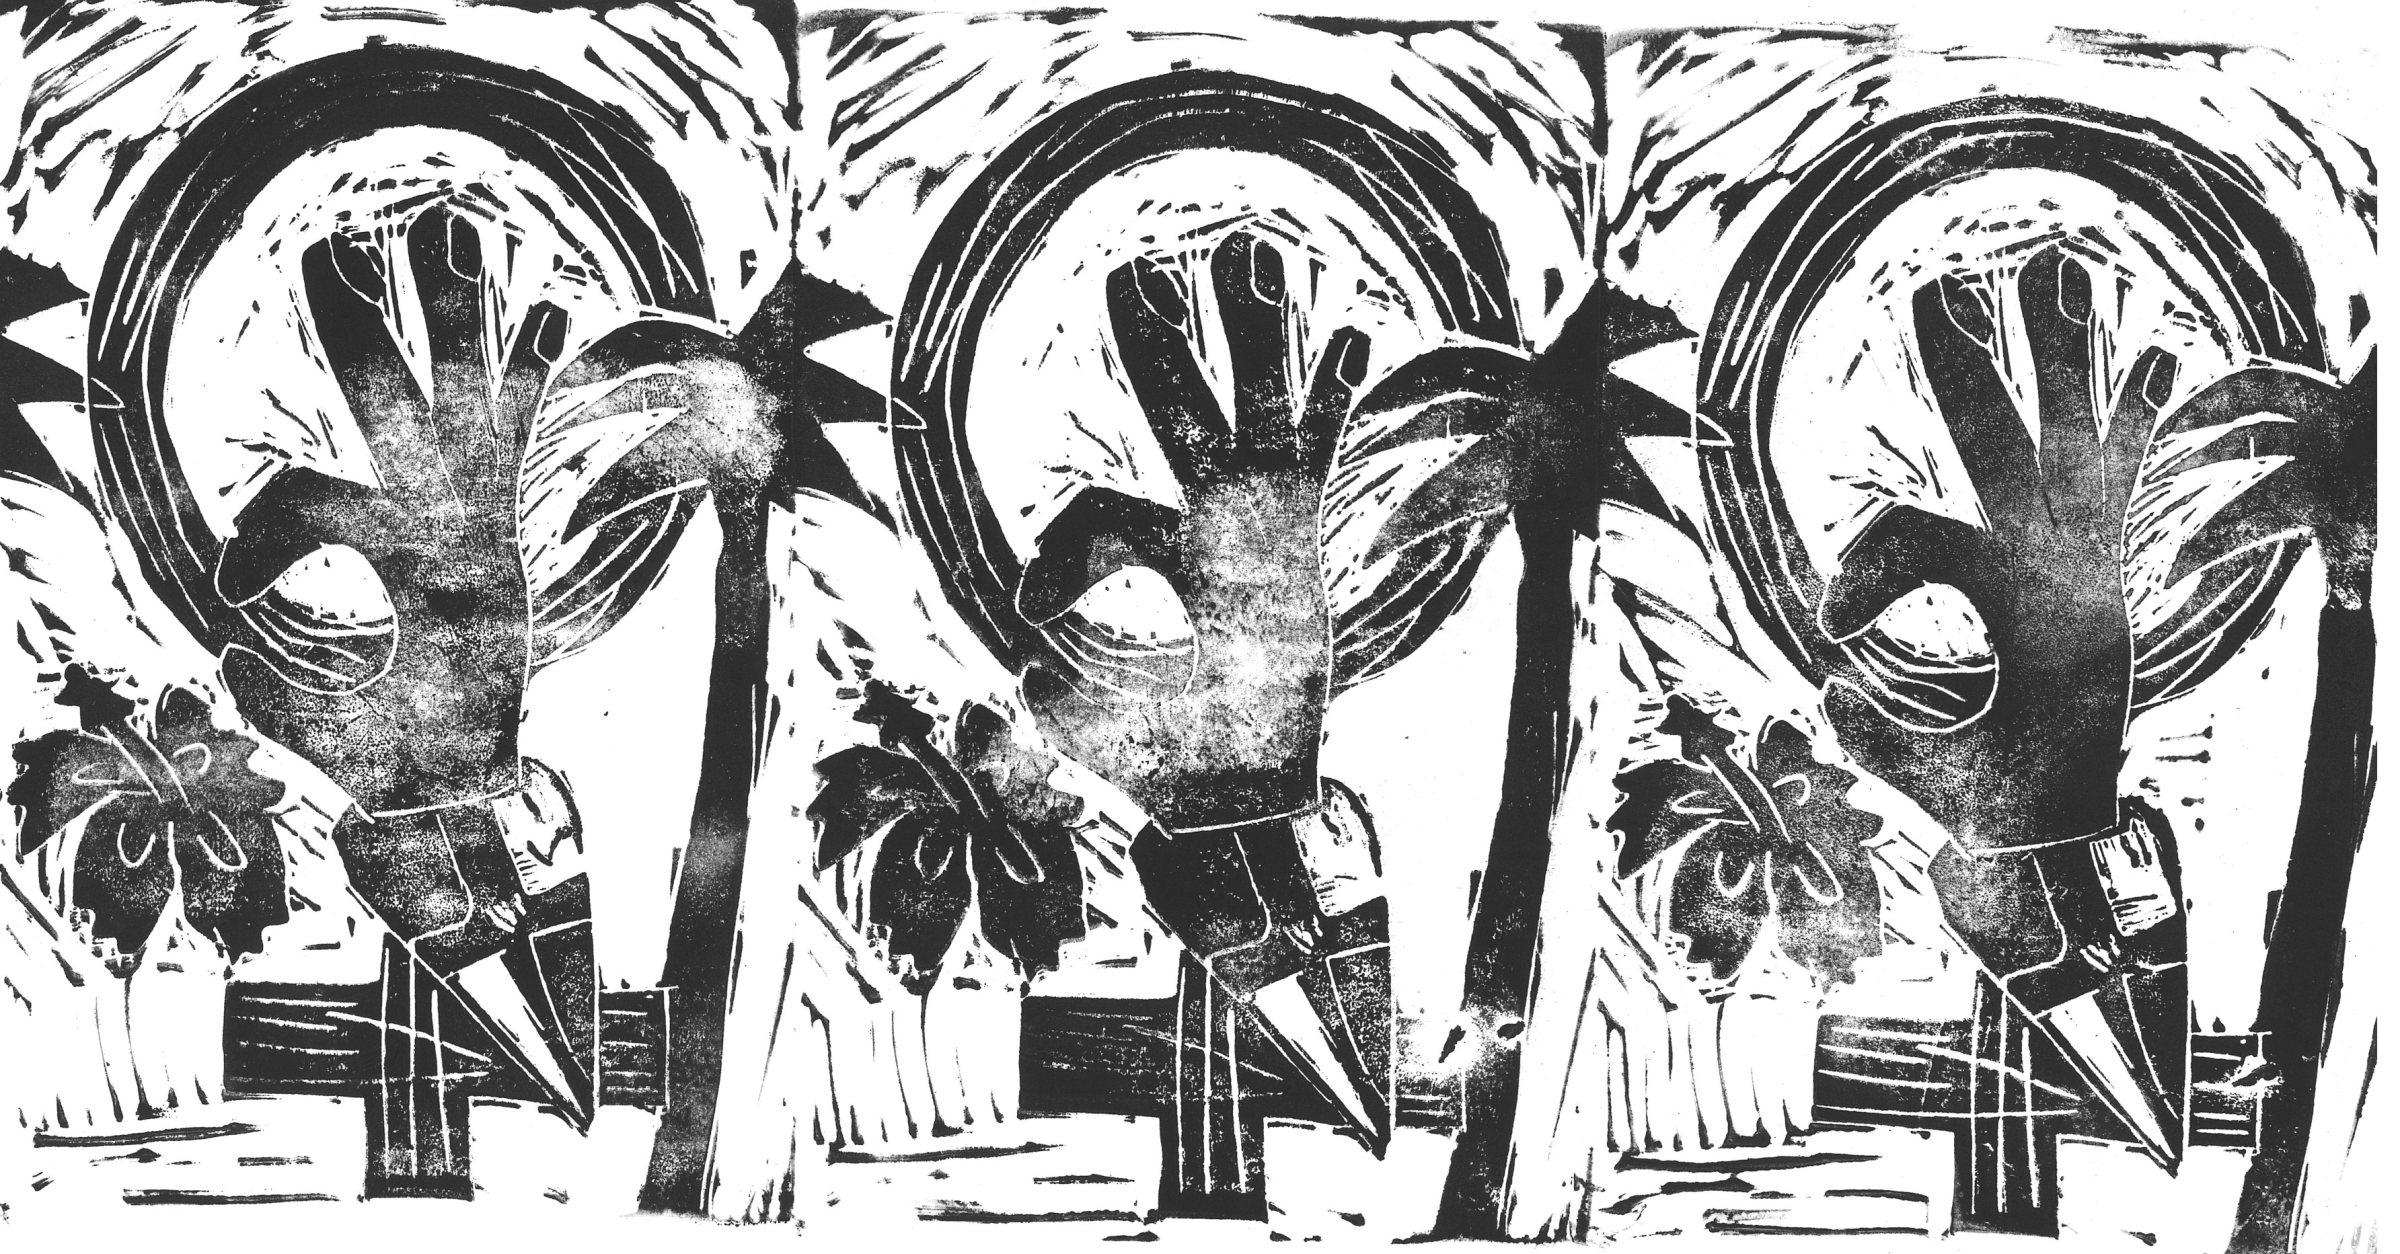 “Tropical Feminism” by Alexandra Rodriguez Dalmau is a block print art piece that represents Dominican feminists ongoing fight to include the “3 causales” or three circumstances in which they believe abortion should be decriminalized. 